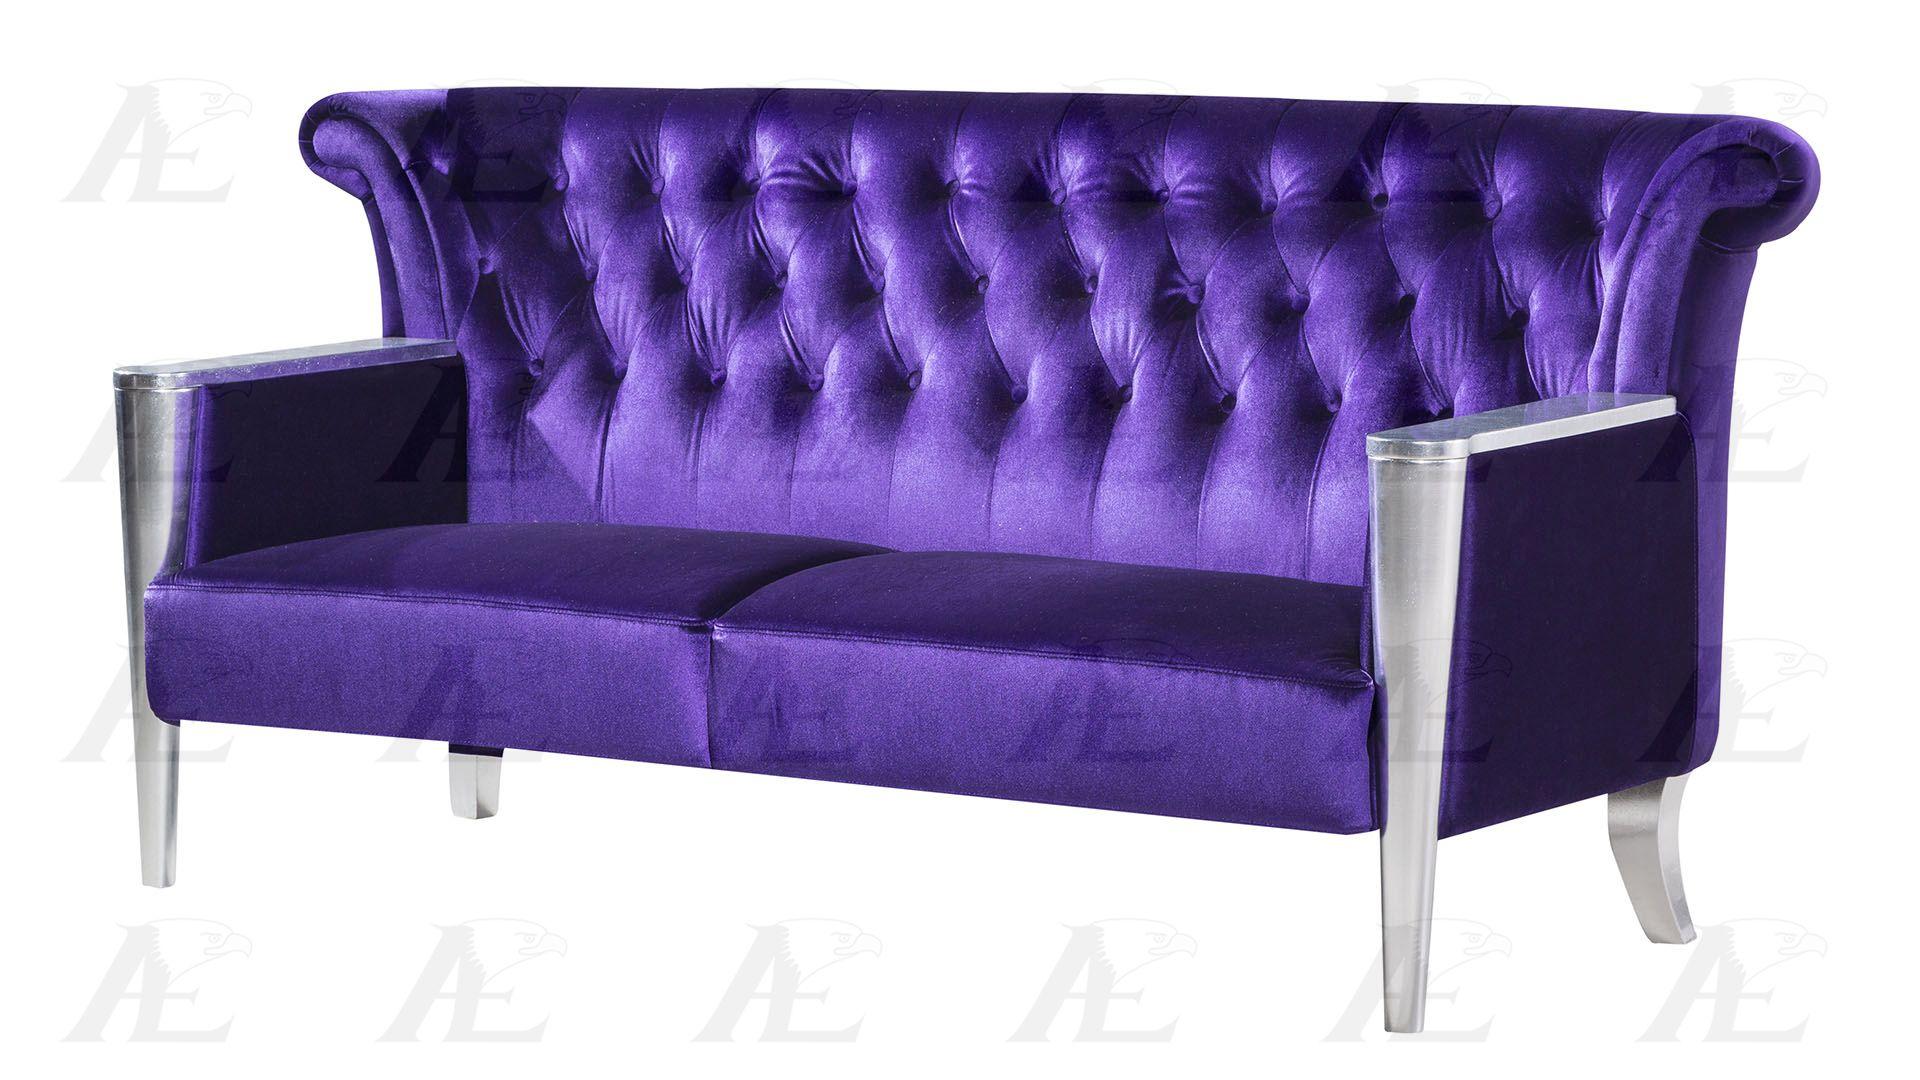 

                    
American Eagle Furniture AE592 Sofa Loveseat and Chair Set Purple Fabric Purchase 
